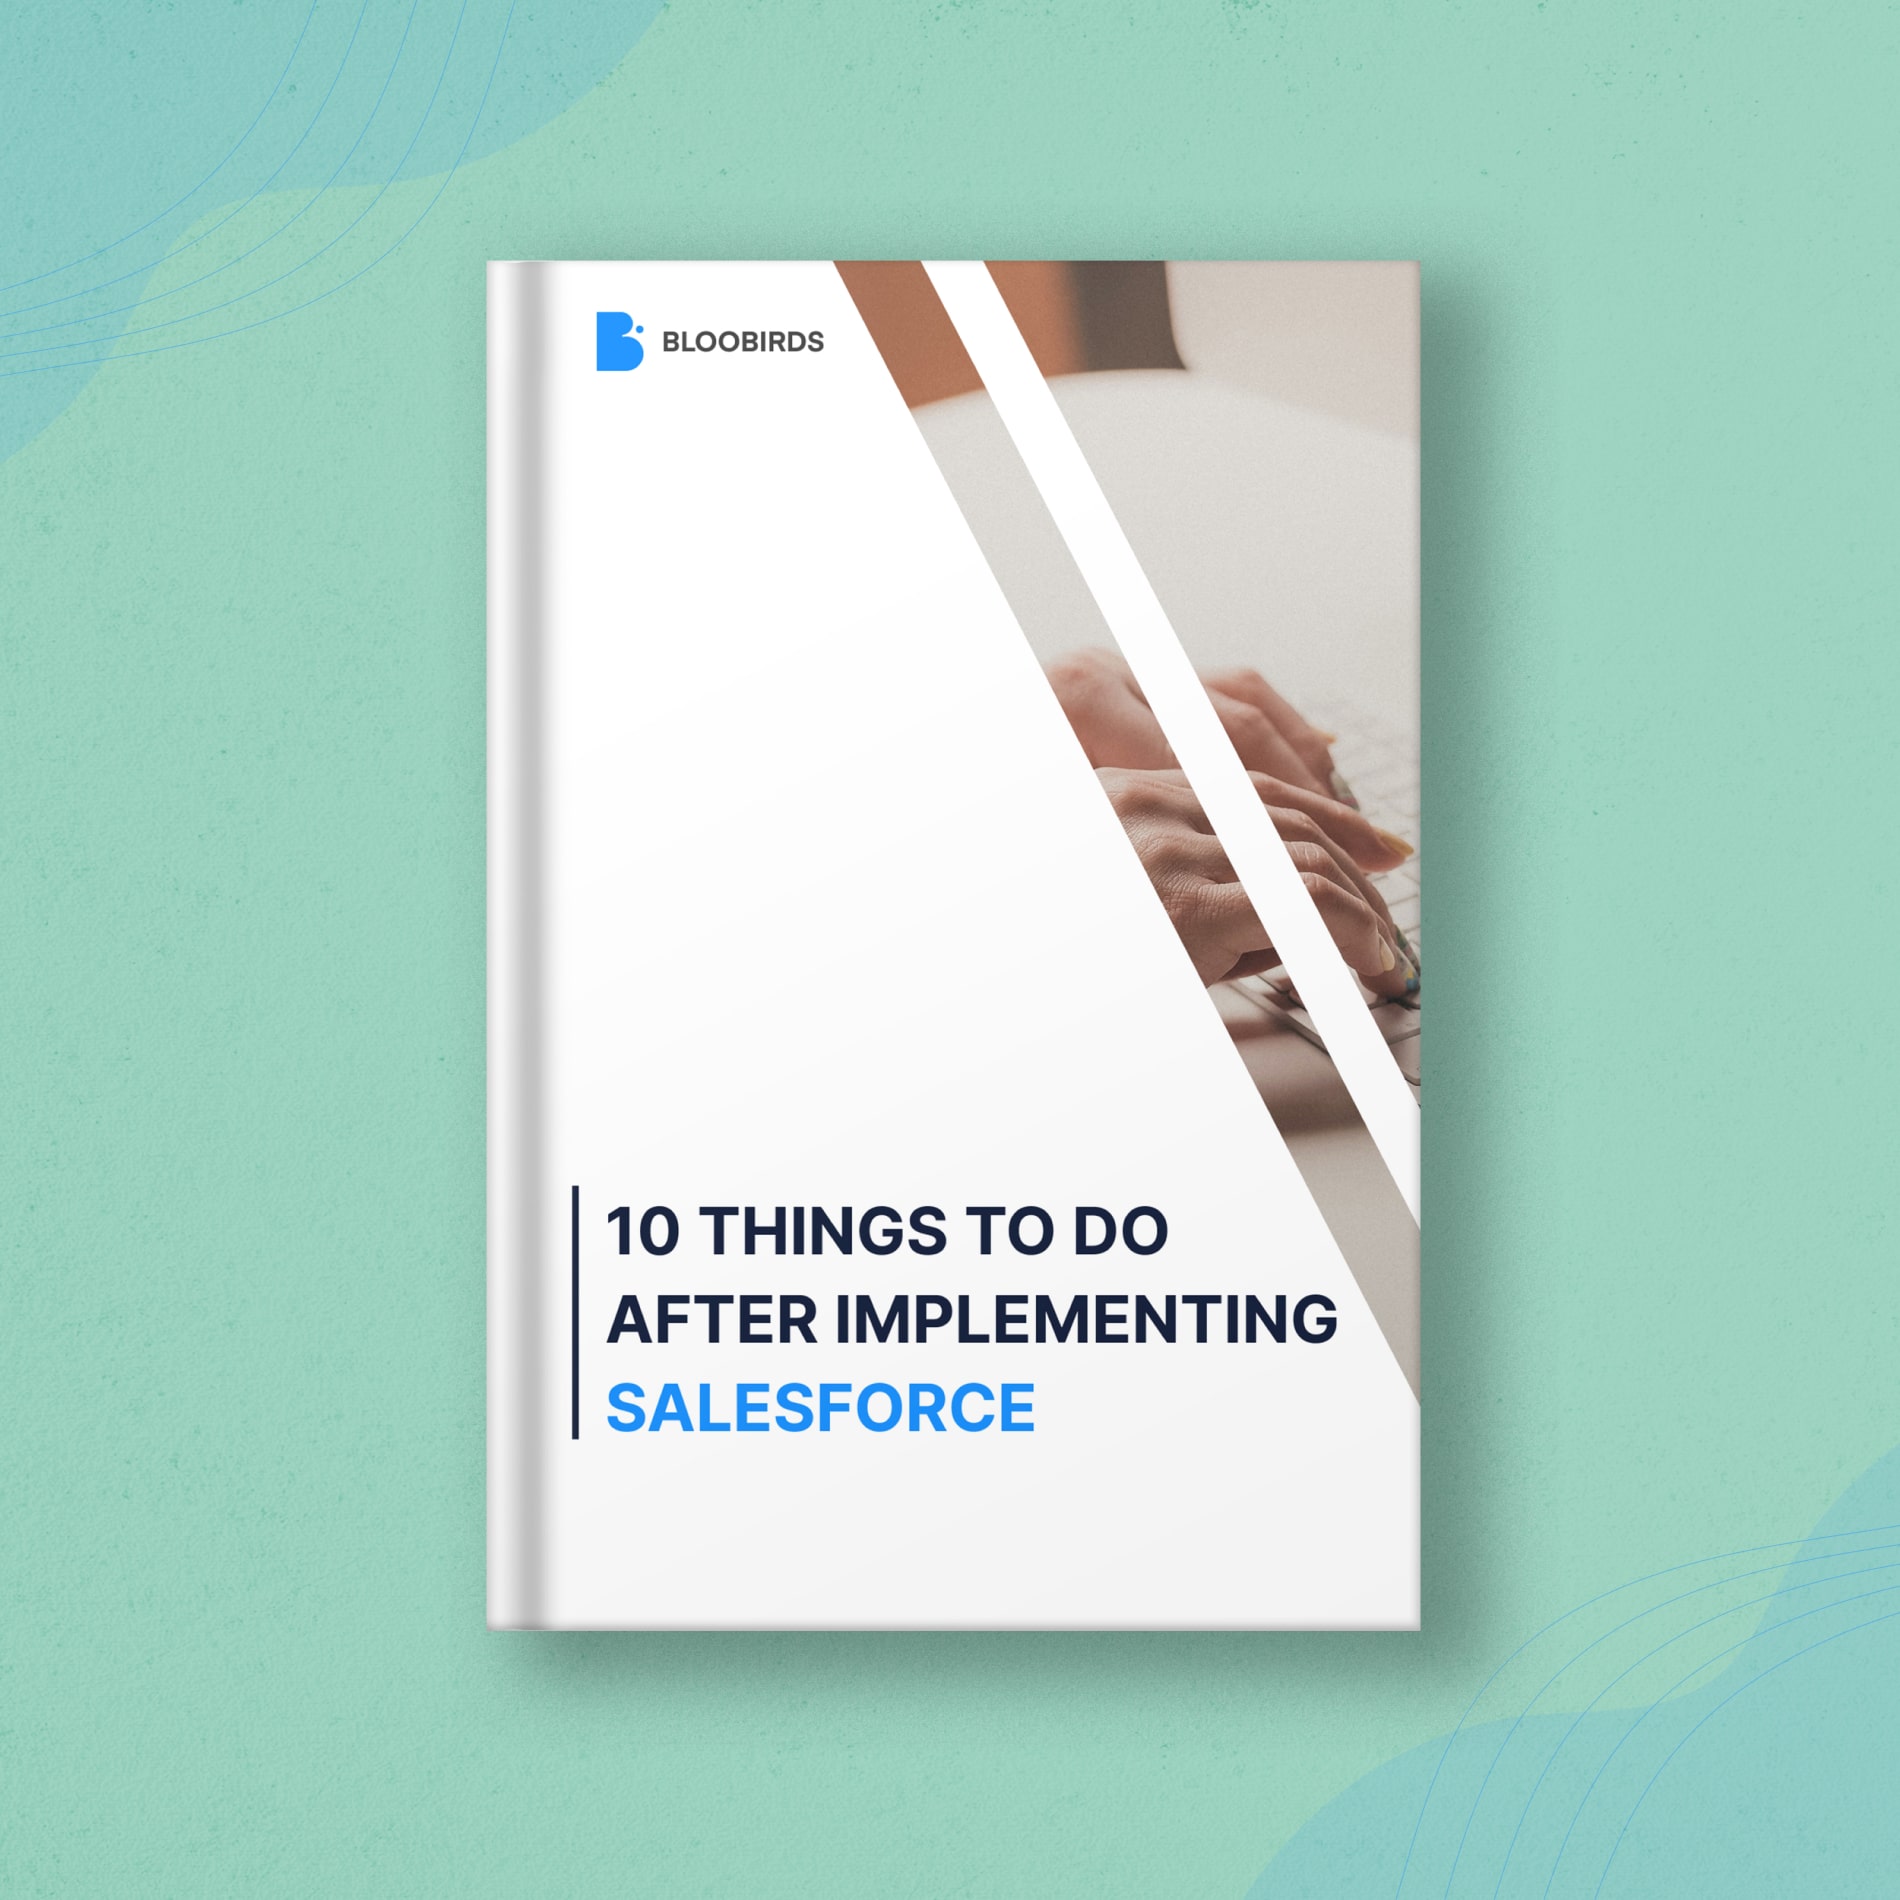 10 Things to do after implementing Salesforce